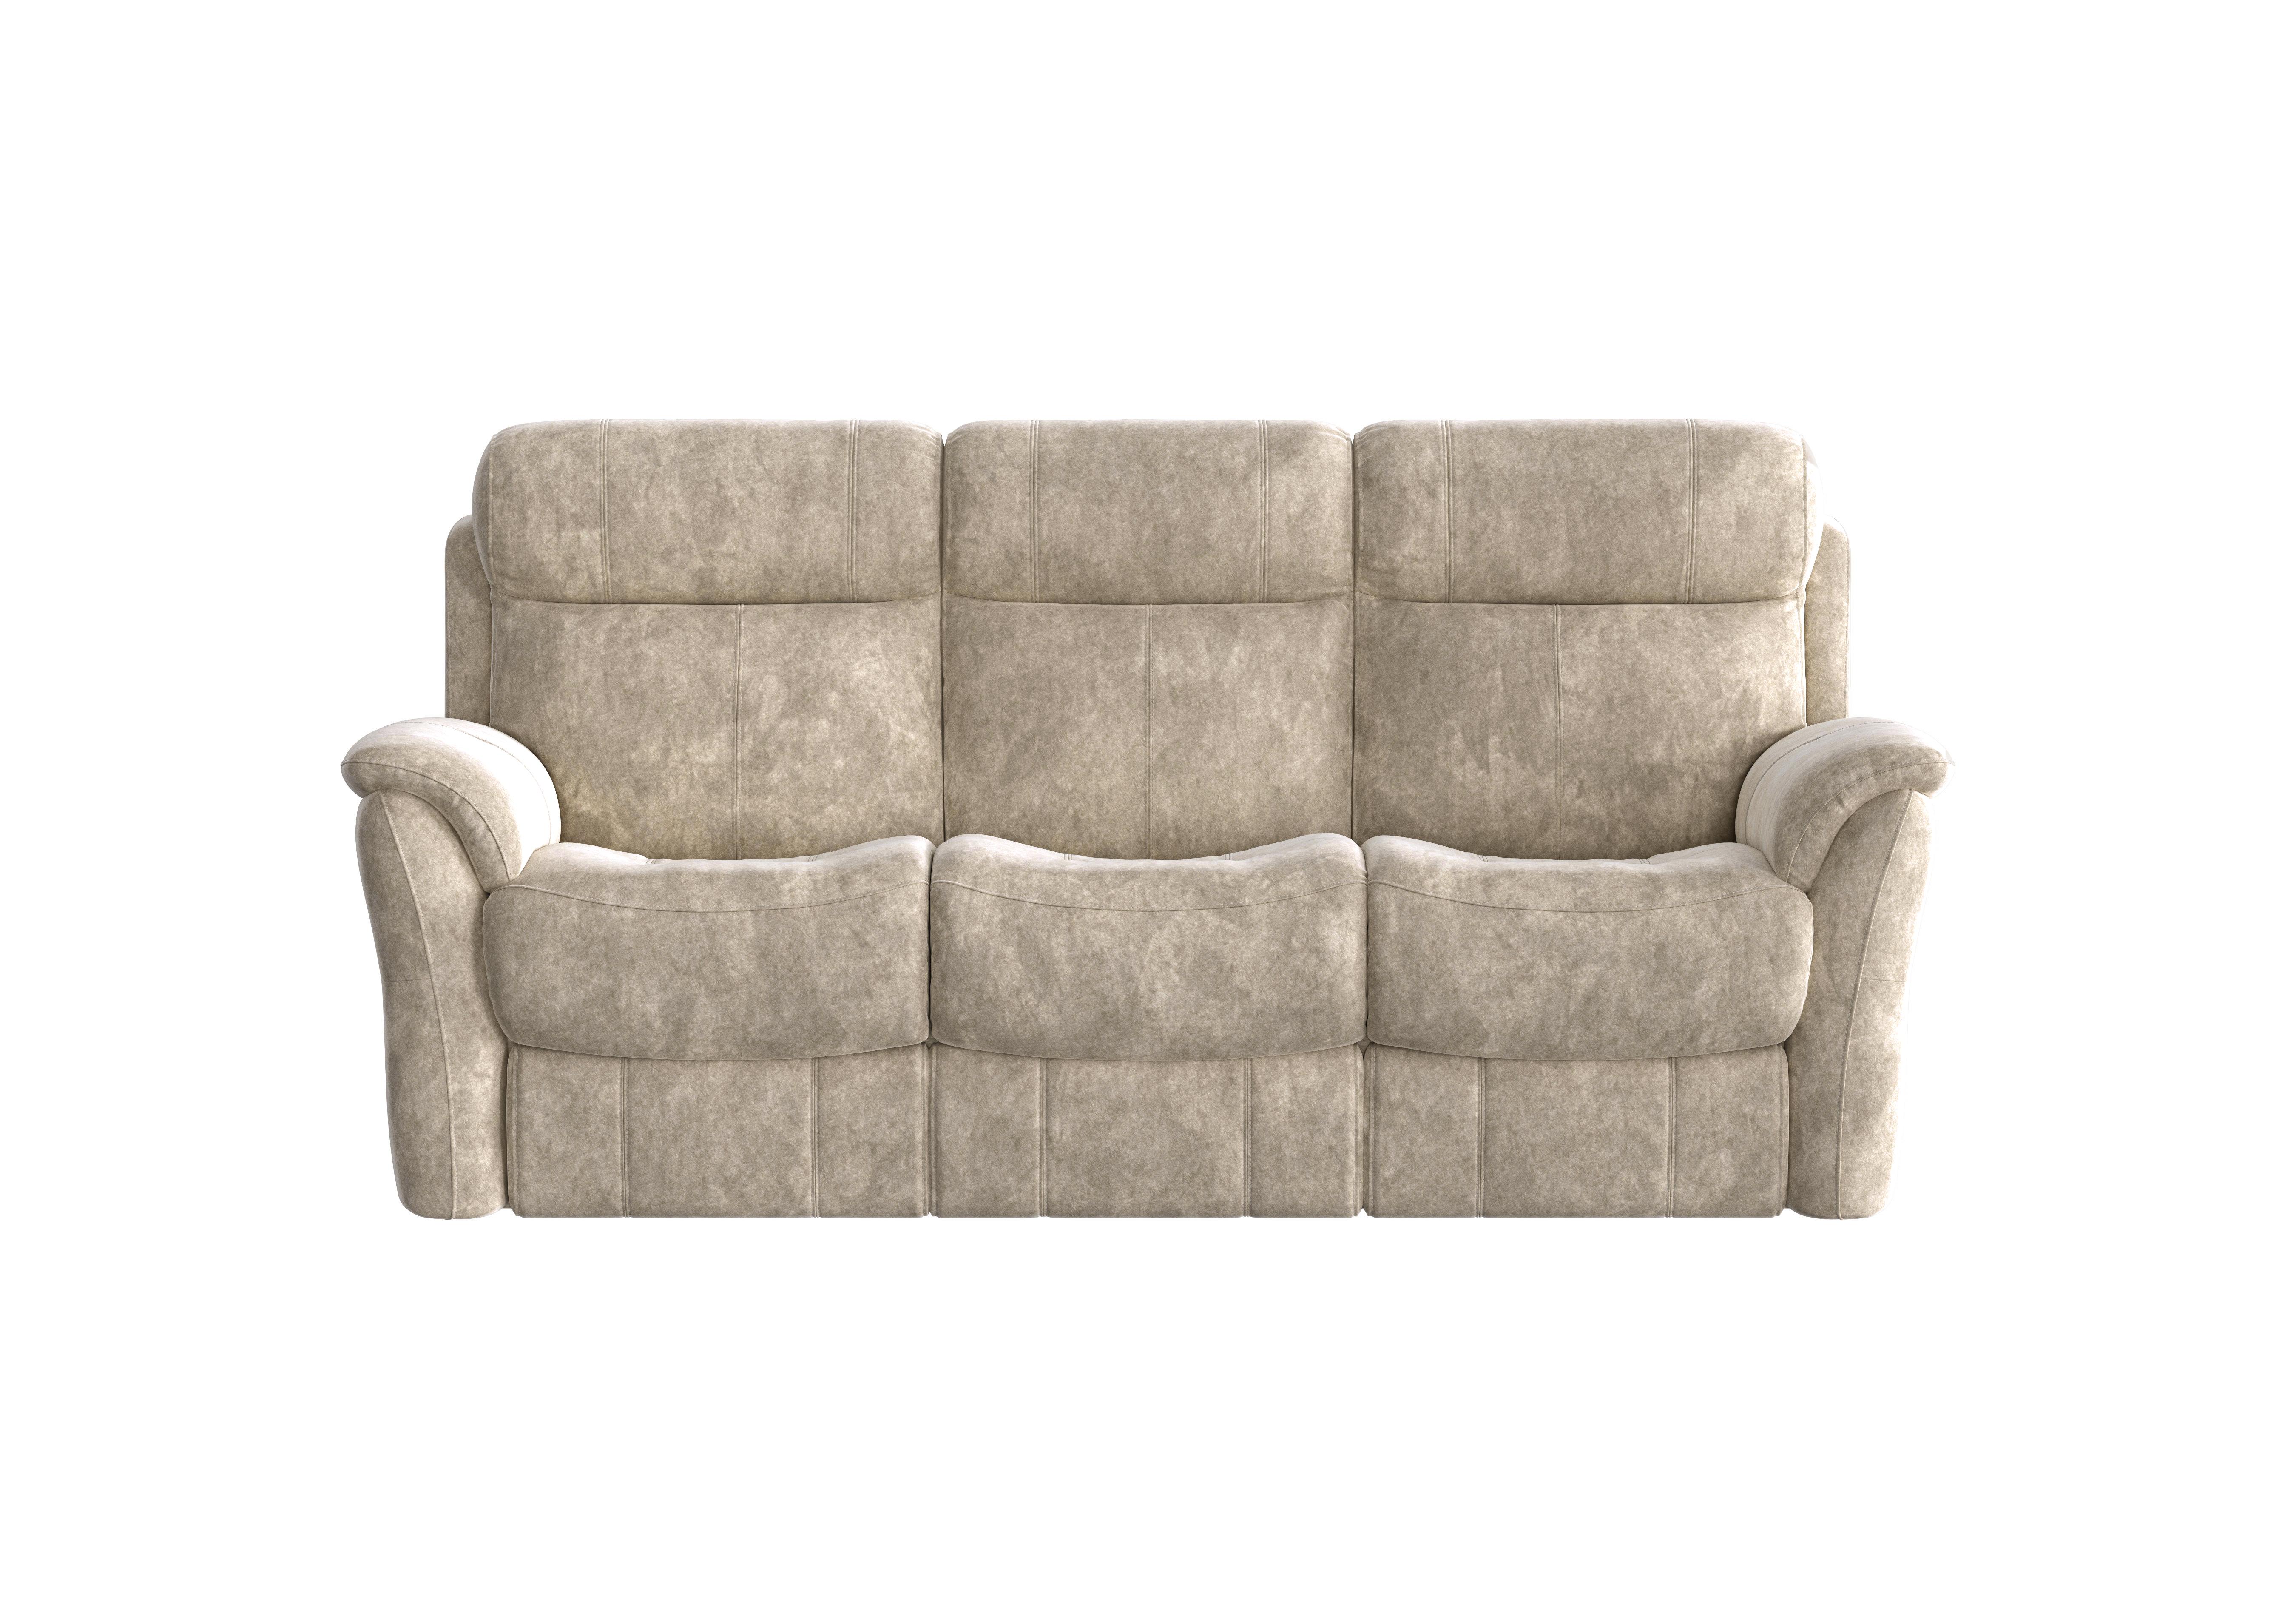 Relax Station Revive 3 Seater Fabric Sofa in Bfa-Bnn-R26 Fv2 Cream on Furniture Village